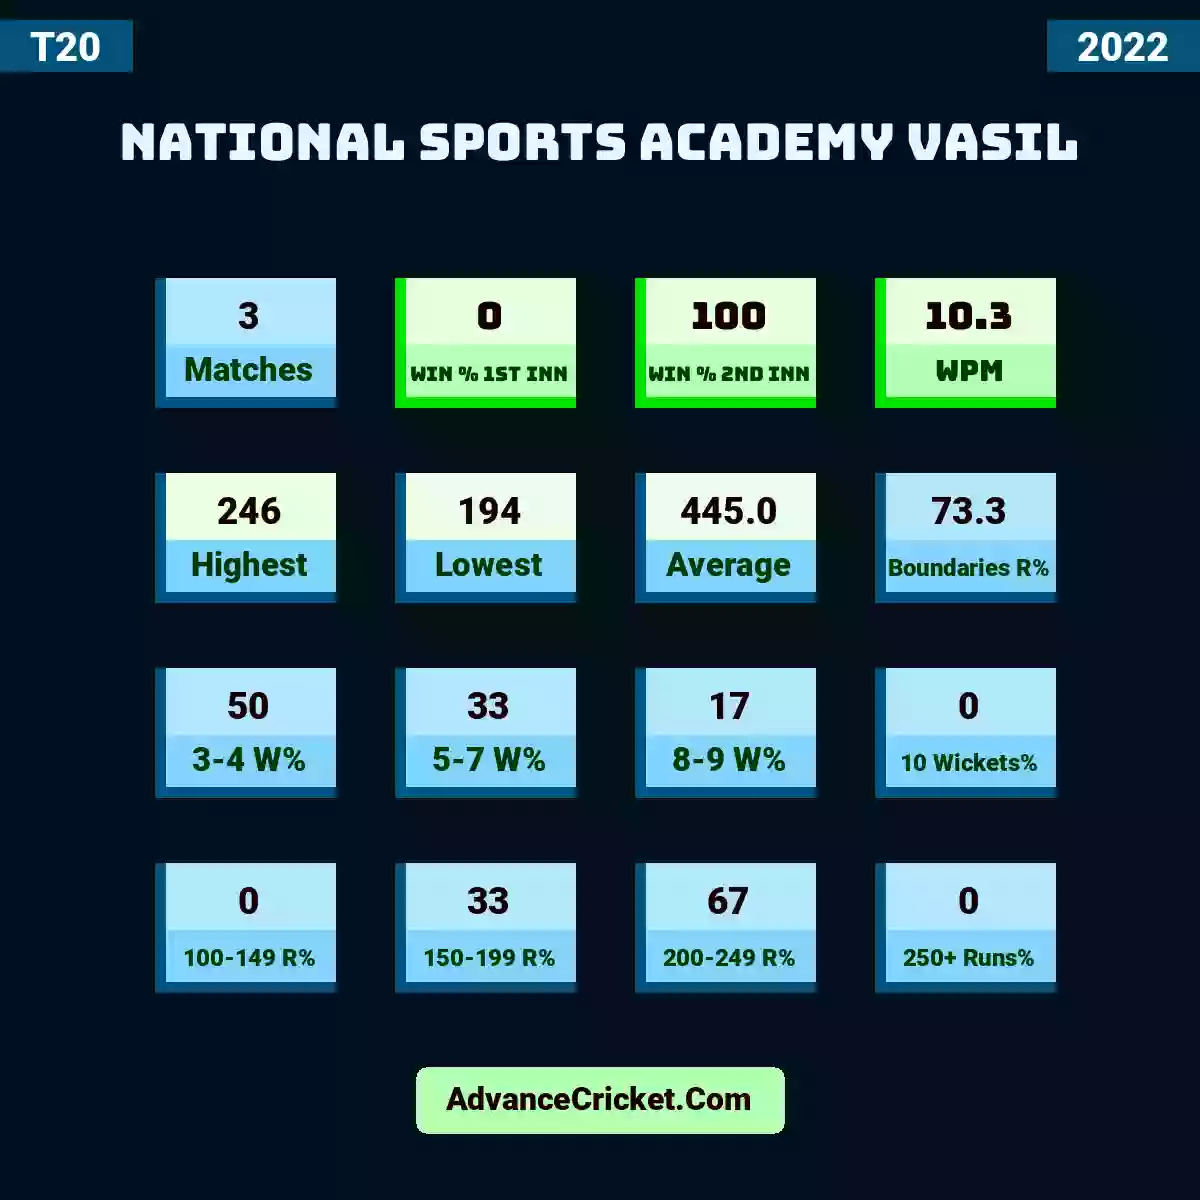 Image showing National Sports Academy Vasil with Matches: 3, Win % 1st Inn: 0, Win % 2nd Inn: 100, WPM: 10.3, Highest: 246, Lowest: 194, Average: 445.0, Boundaries R%: 73.3, 3-4 W%: 50, 5-7 W%: 33, 8-9 W%: 17, 10 Wickets%: 0, 100-149 R%: 0, 150-199 R%: 33, 200-249 R%: 67, 250+ Runs%: 0.